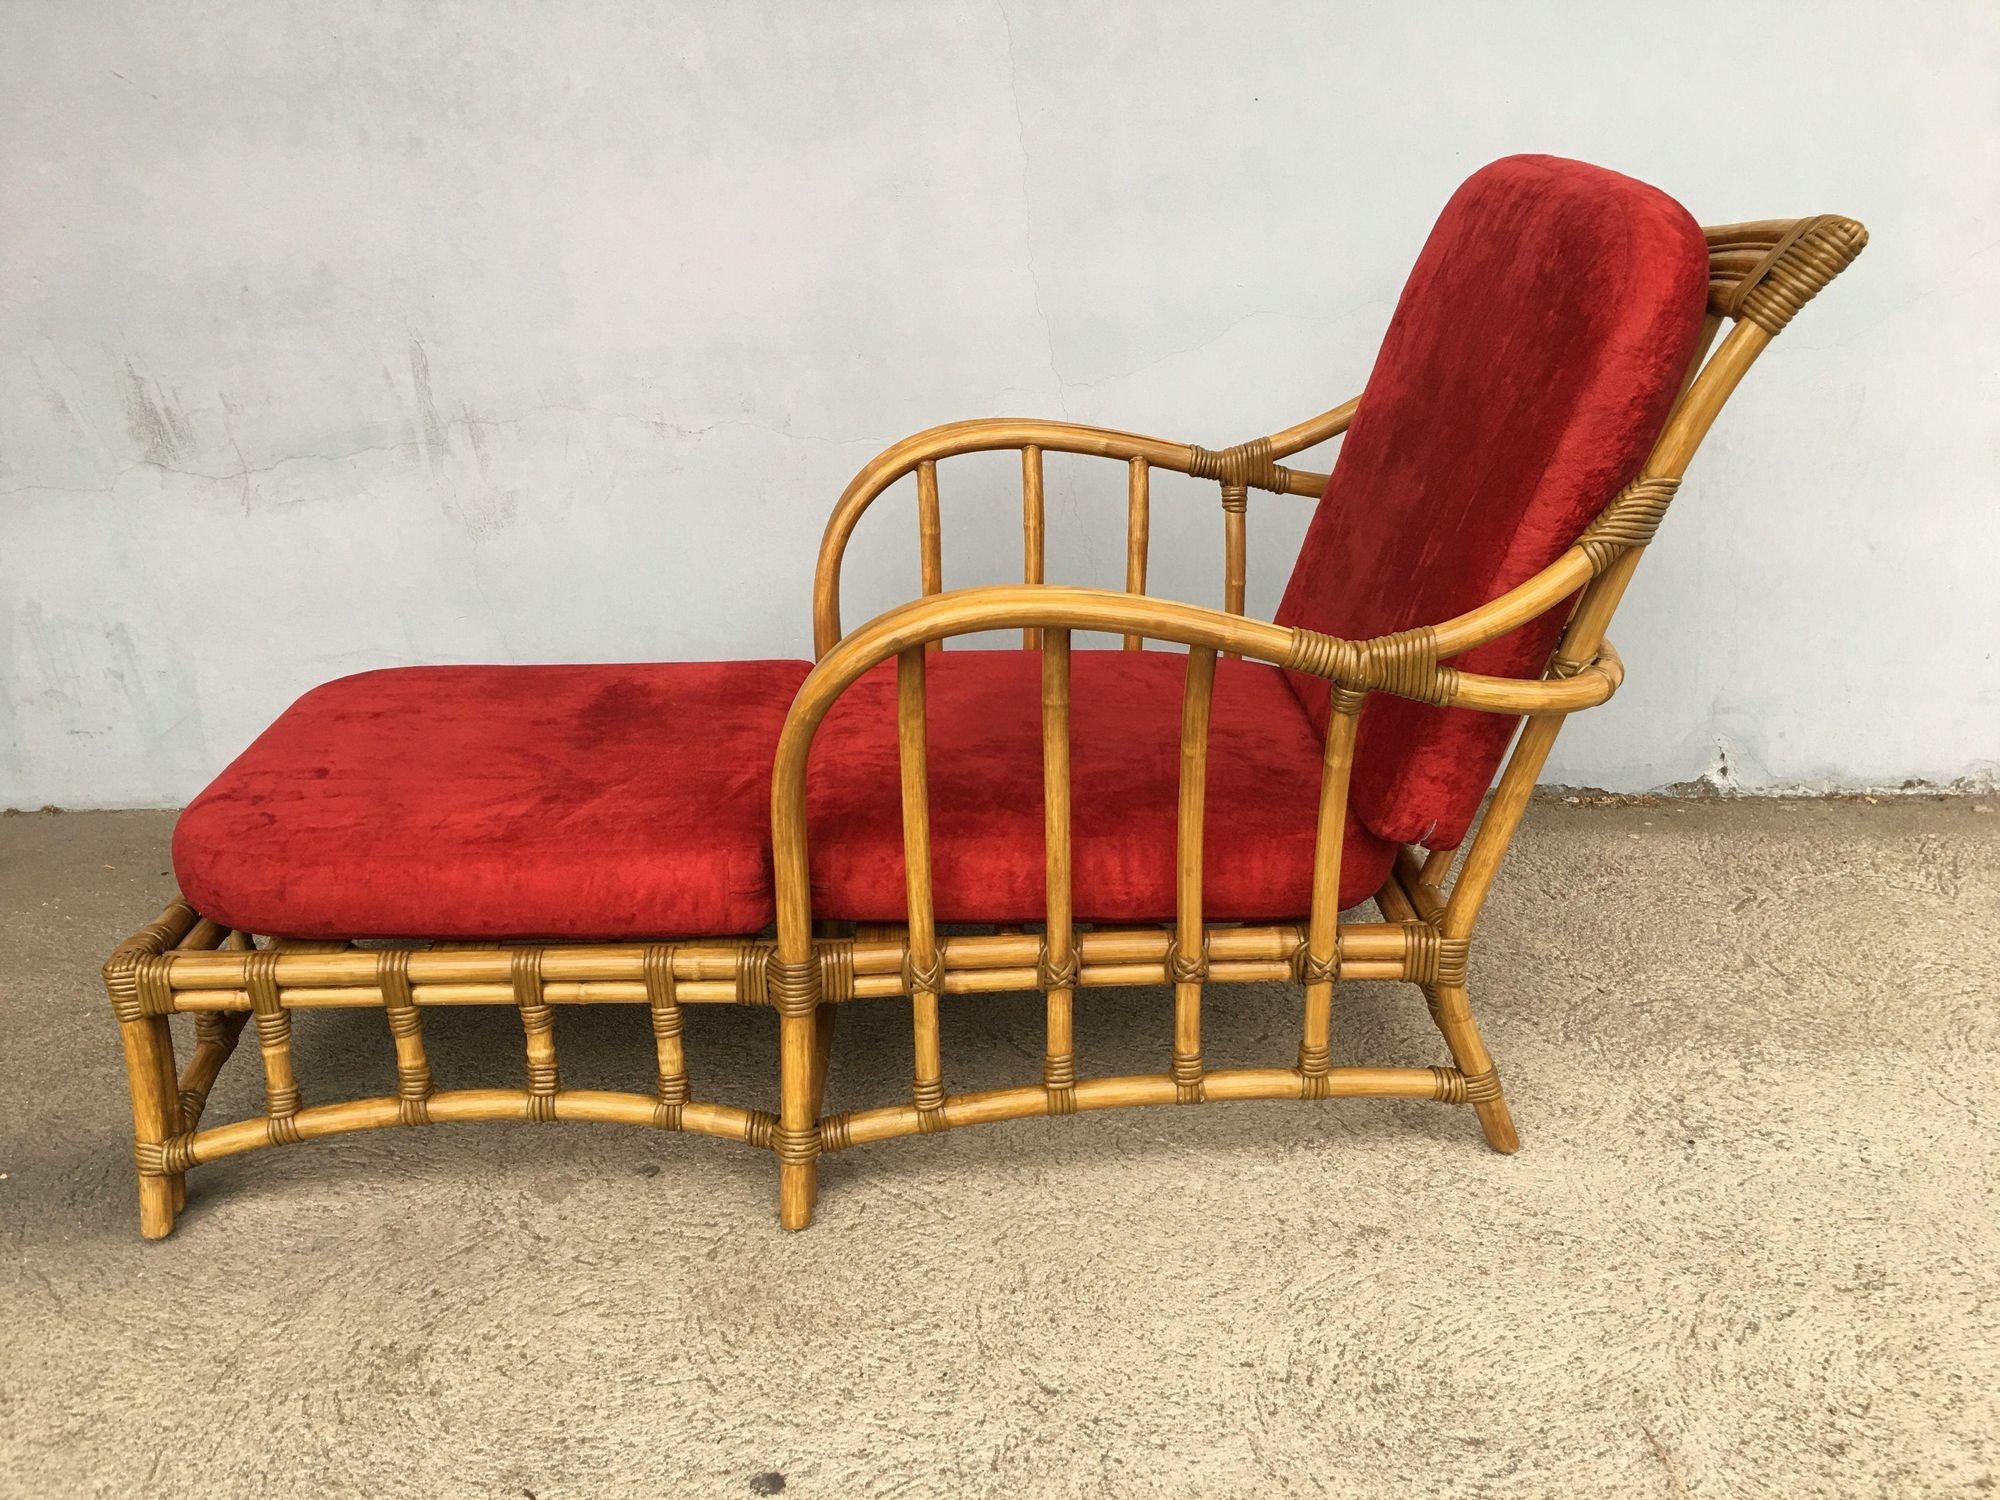 Restored Mid Century Chaise Lounge Outdoor Patio Chair, Pair In Excellent Condition For Sale In Van Nuys, CA